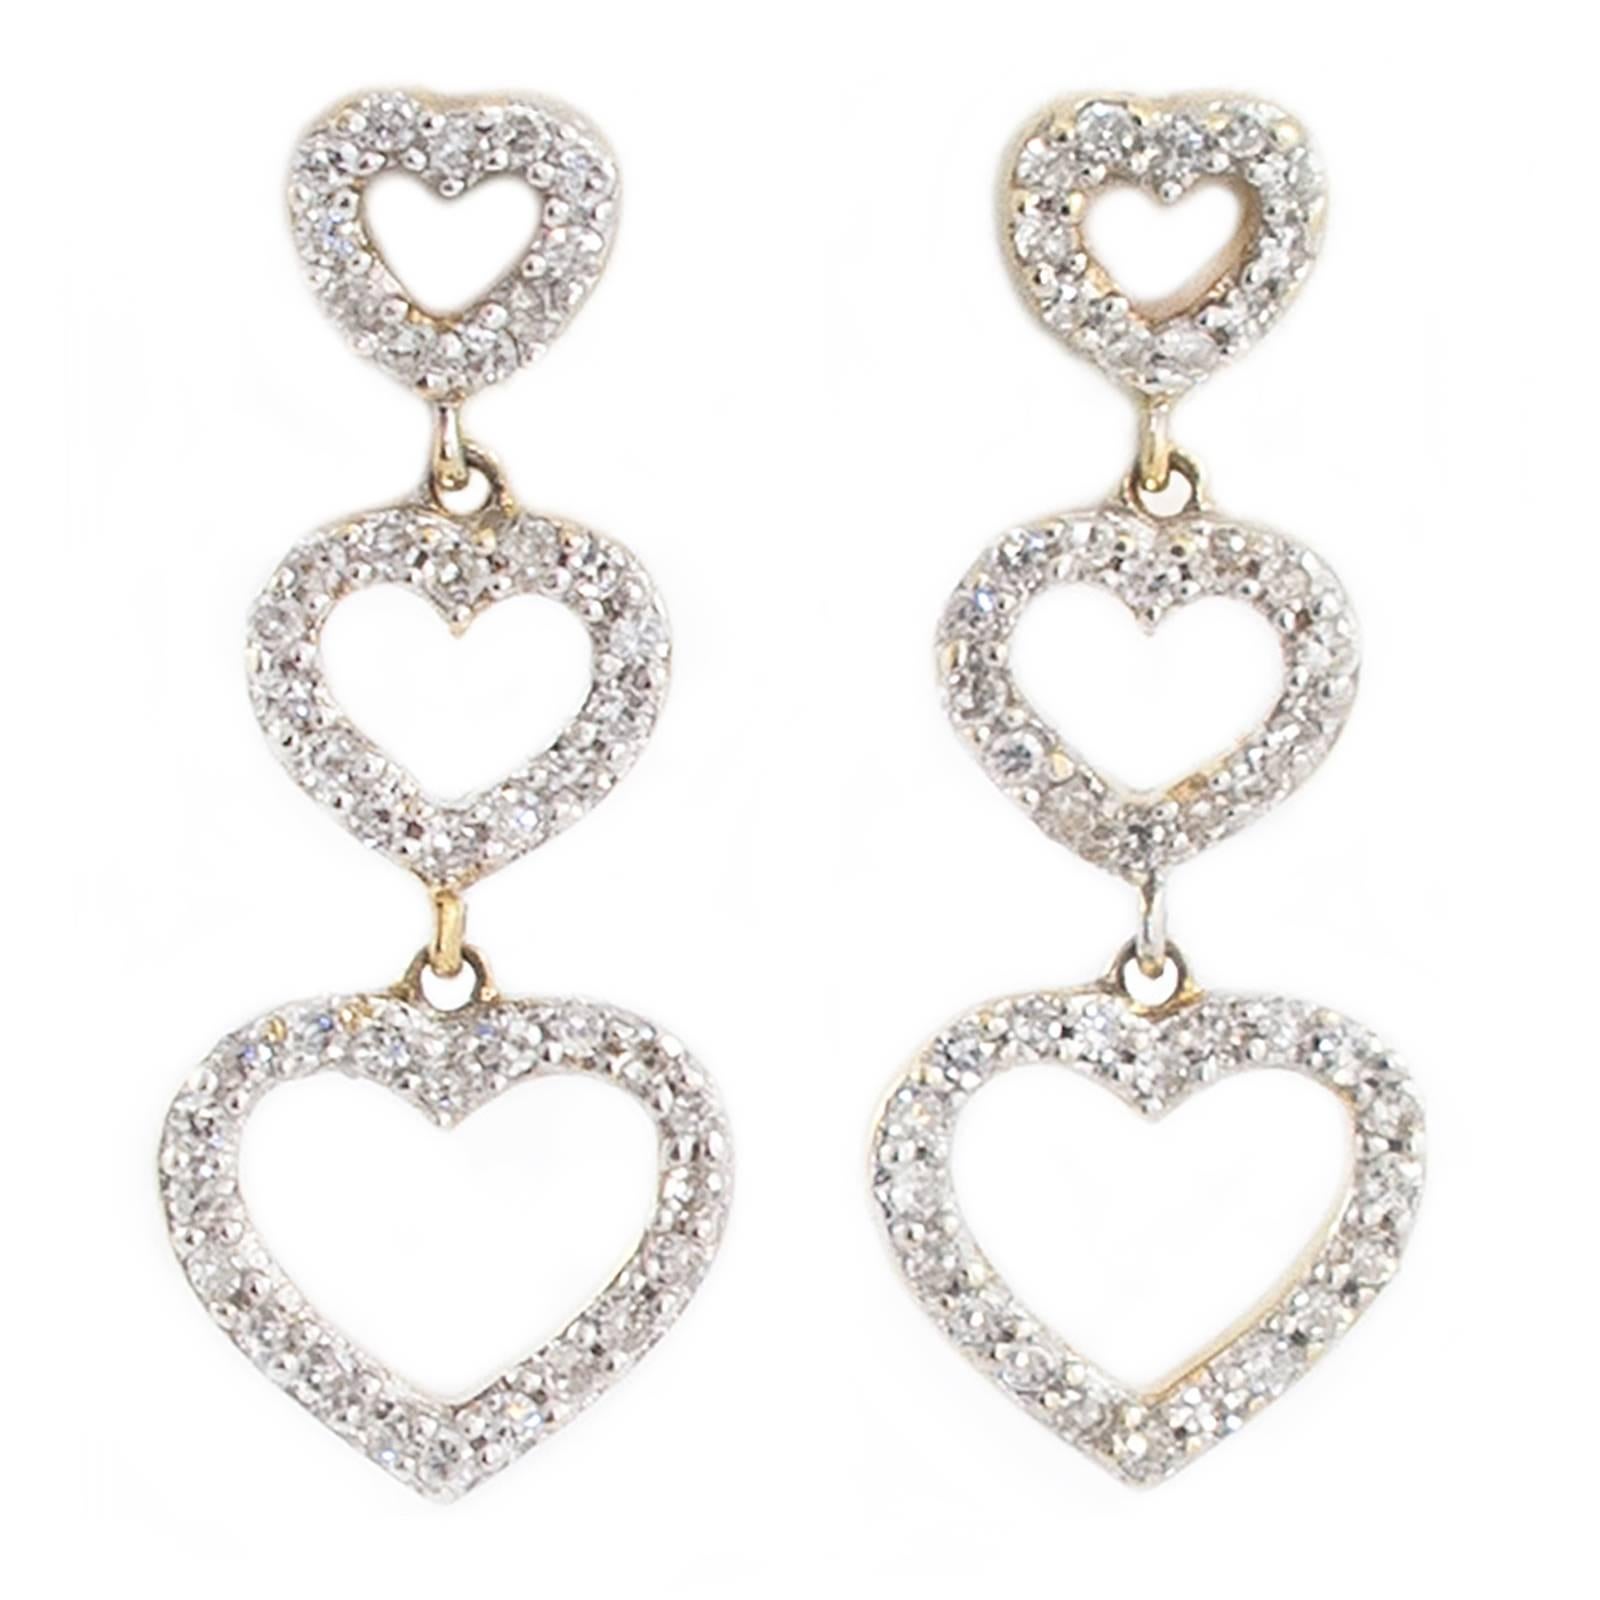 In these pretty Diamond Heart Drop Earrings, three open hearts are graduated and set with 90 Diamonds that total 1 carat. They hang just shy of one inch long and the bottom hearts measure 3/8th of an inch wide.

The earrings sit well on the ears and